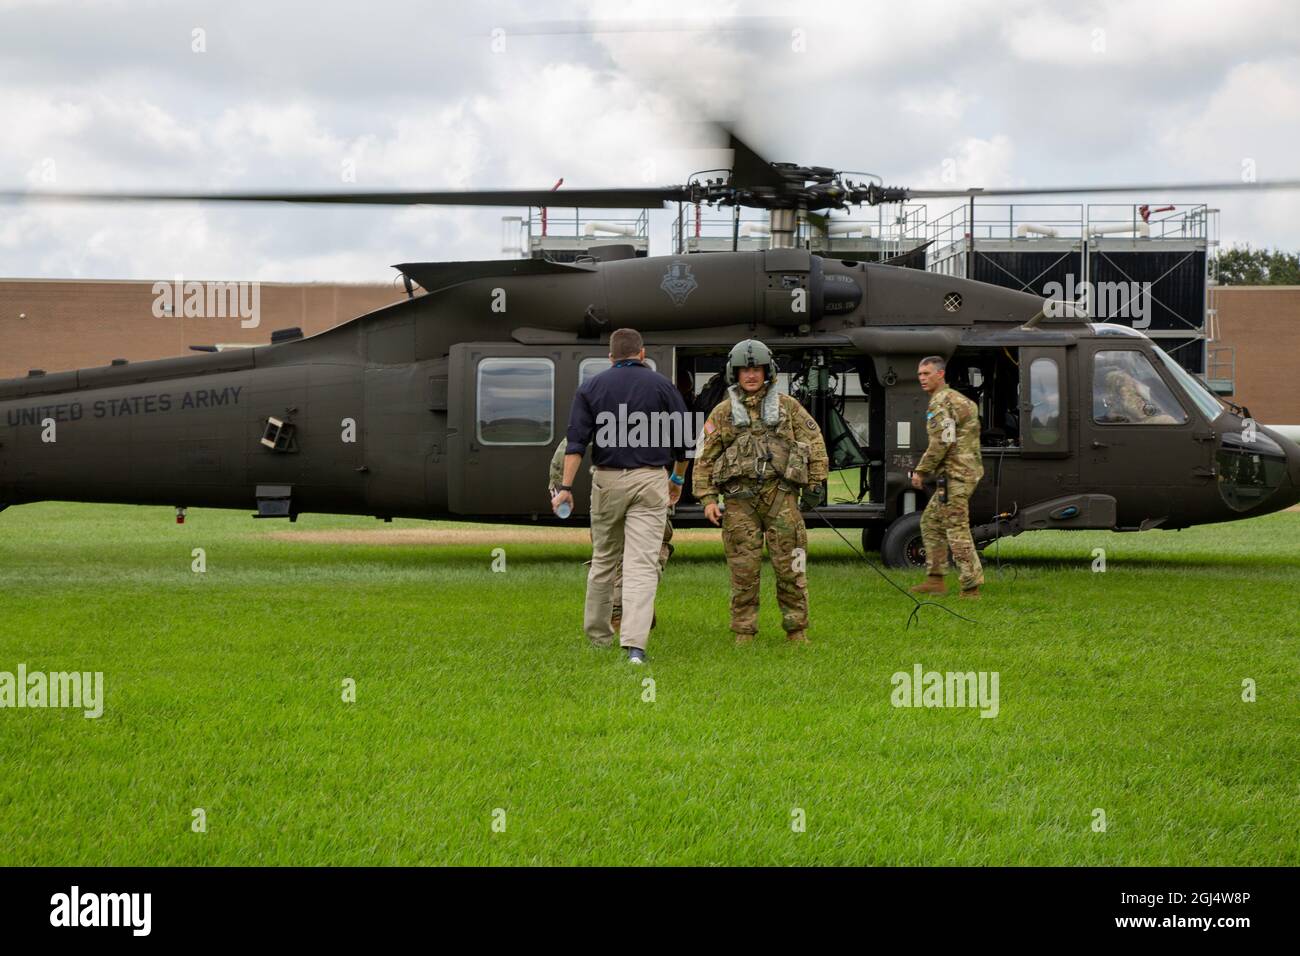 U.S. Army Corps of Engineers leaders, along with Louisiana state officials, board a Louisiana National Guard UH-60 Blackhawk at the Governor's Office of Homeland Security and Emergency Preparedness in Baton Rouge, Louisiana, Sept. 1, 2021. USACE is working closely with local, state and federal partners to respond to Hurricane Ida. (U.S. Army photo by Maj. Grace Geiger) Stock Photo